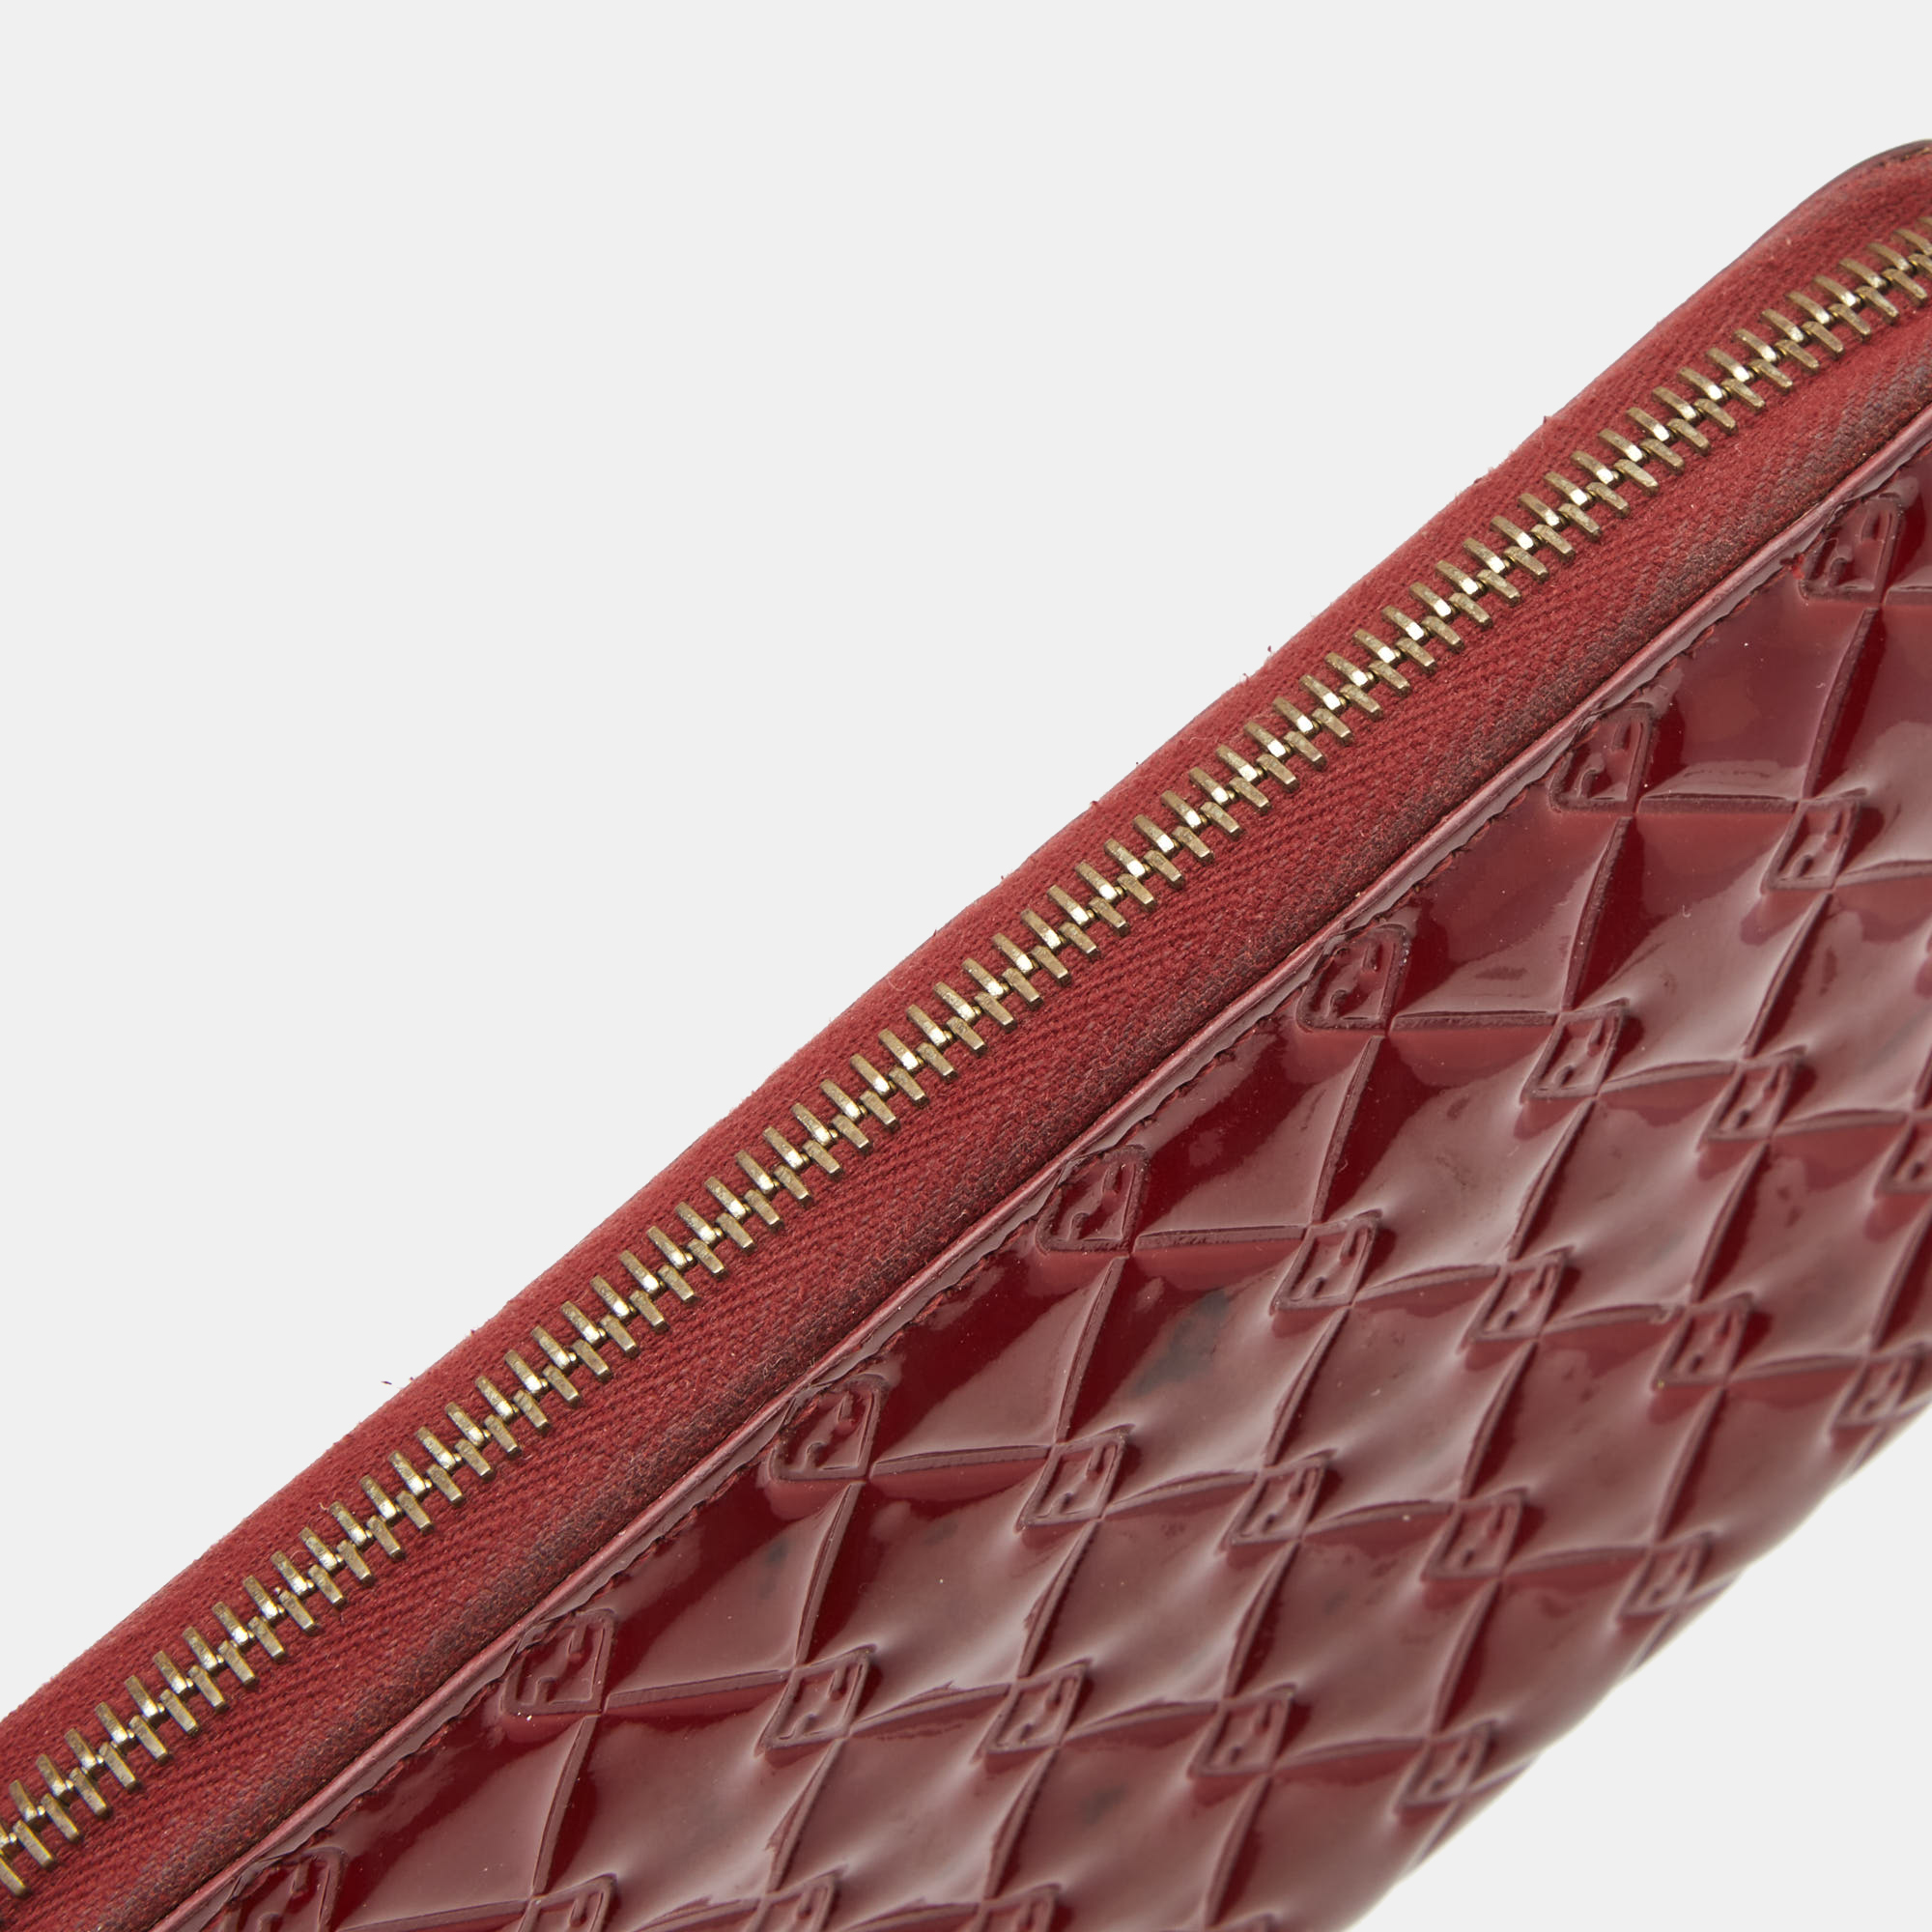 Fendi Red Patent Leather Fendilicious Continental Wallet